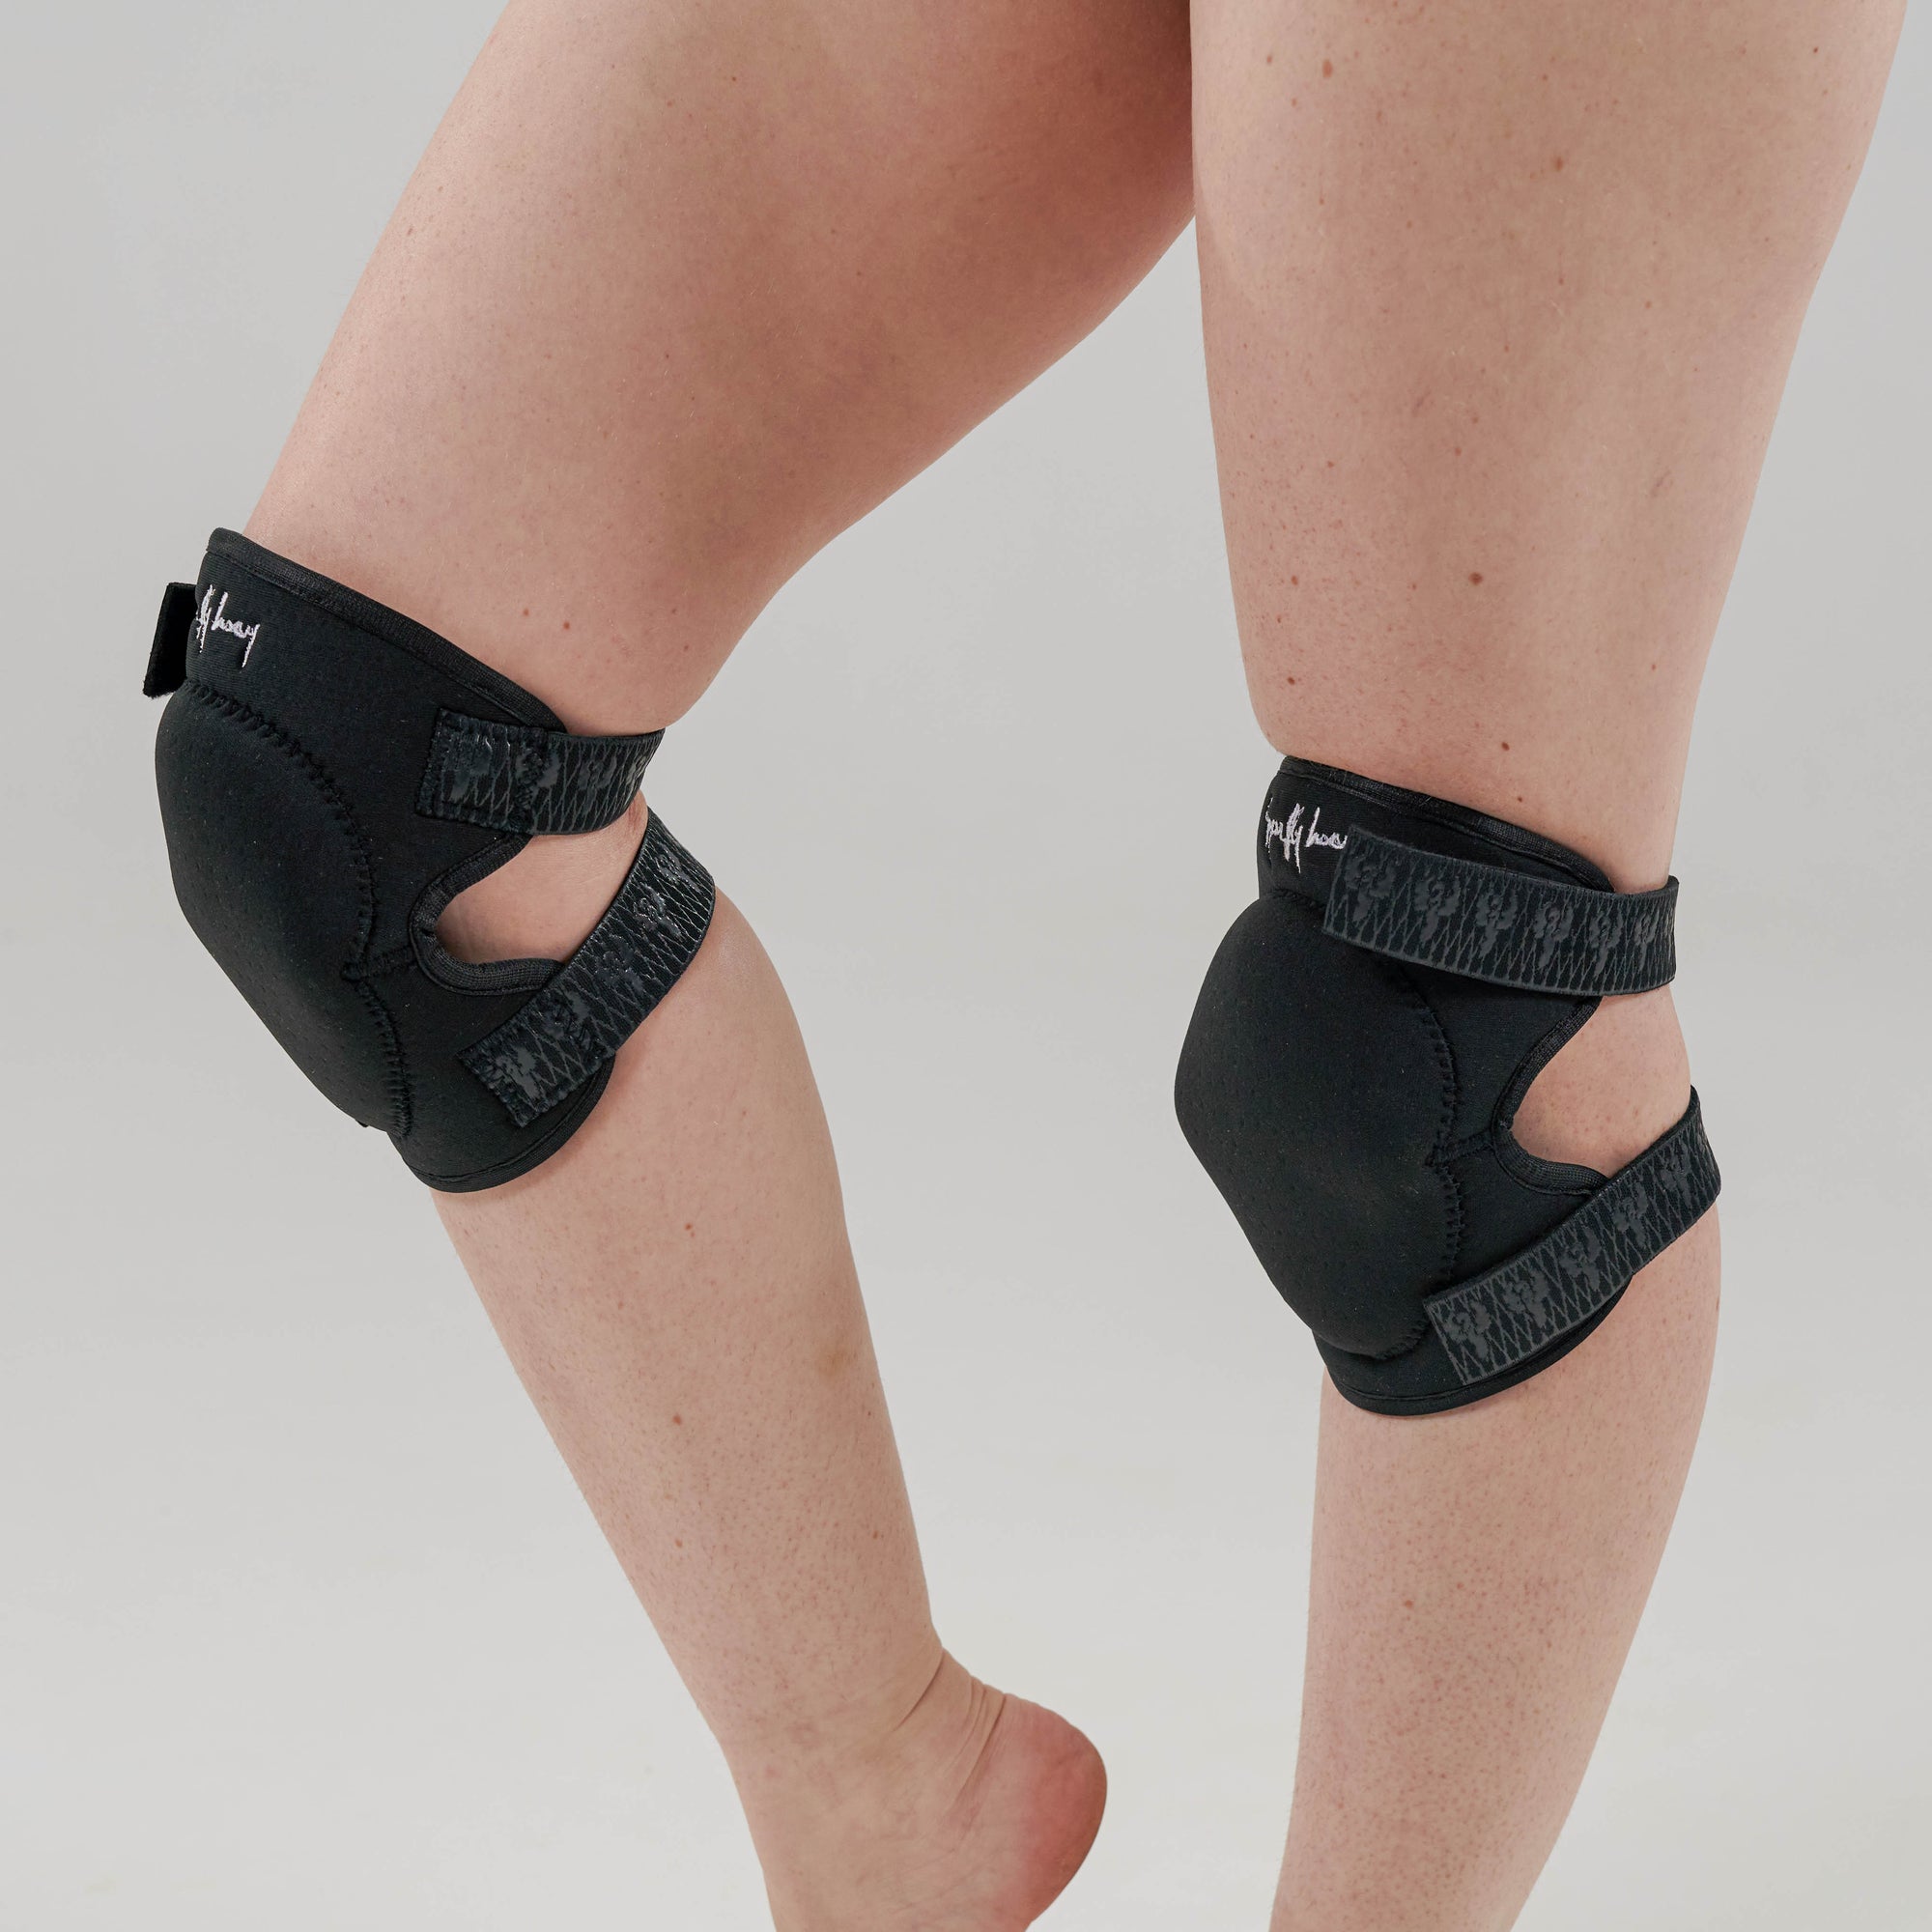 pole dancer in a pole wearing sfh sticky comfort knee pads in black